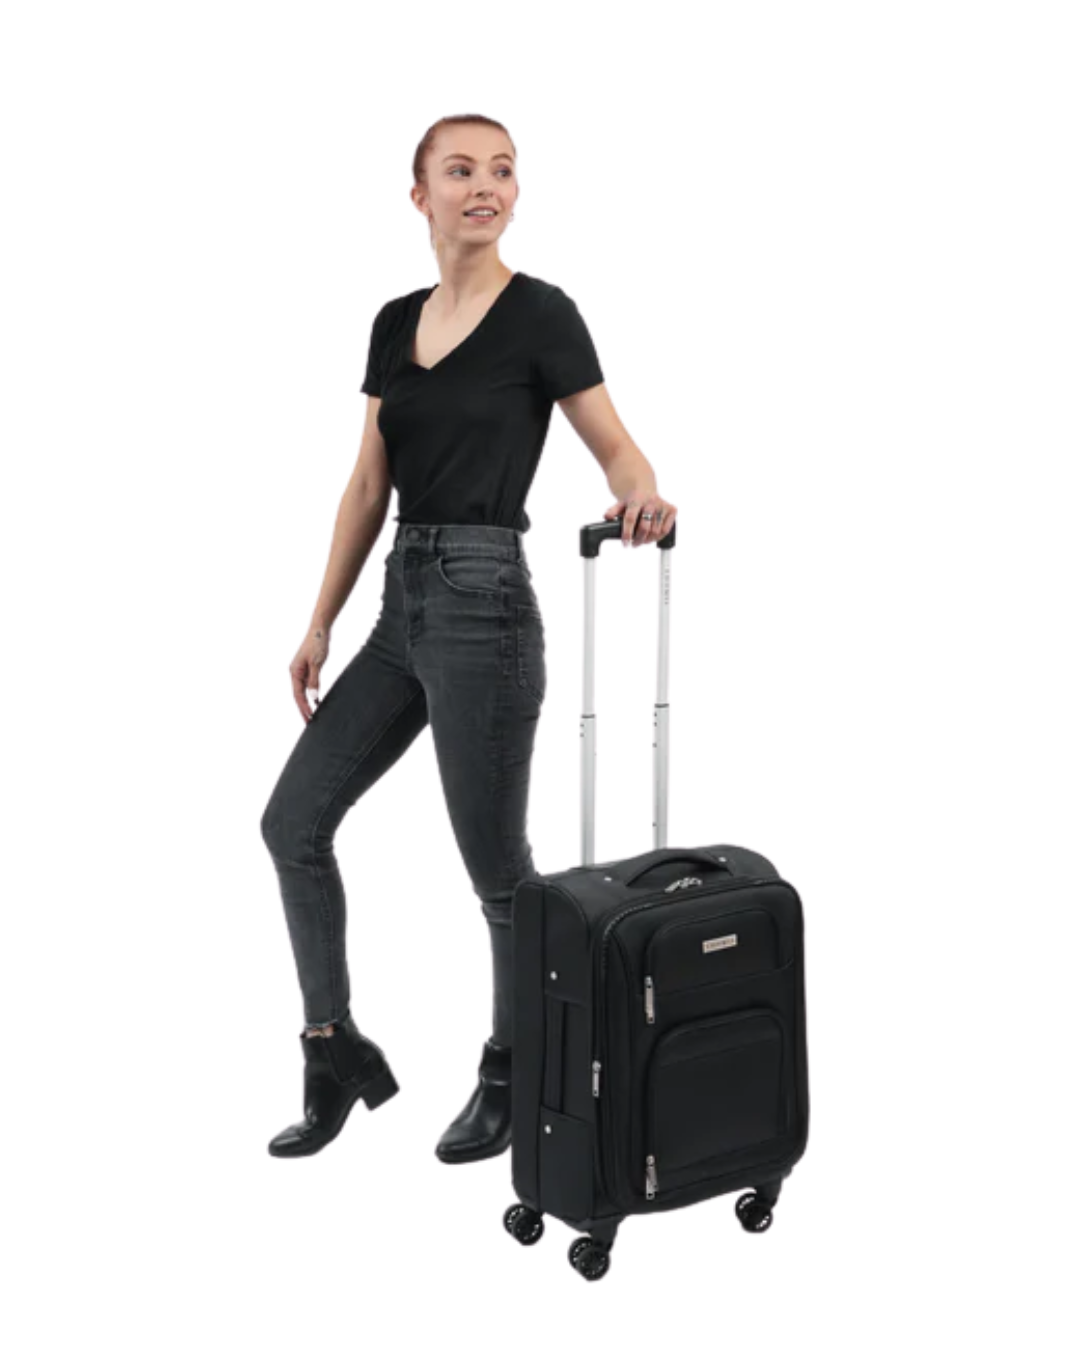 Loomis Expandable Lightweight Black Carry-On Spinner Luggage - 20 inch. Best Carryon and check in luggage with wheels. Best suitcase with wheels. Black carryon luggage. Black Checkin luggage 25 inch. Affordable durable luggage